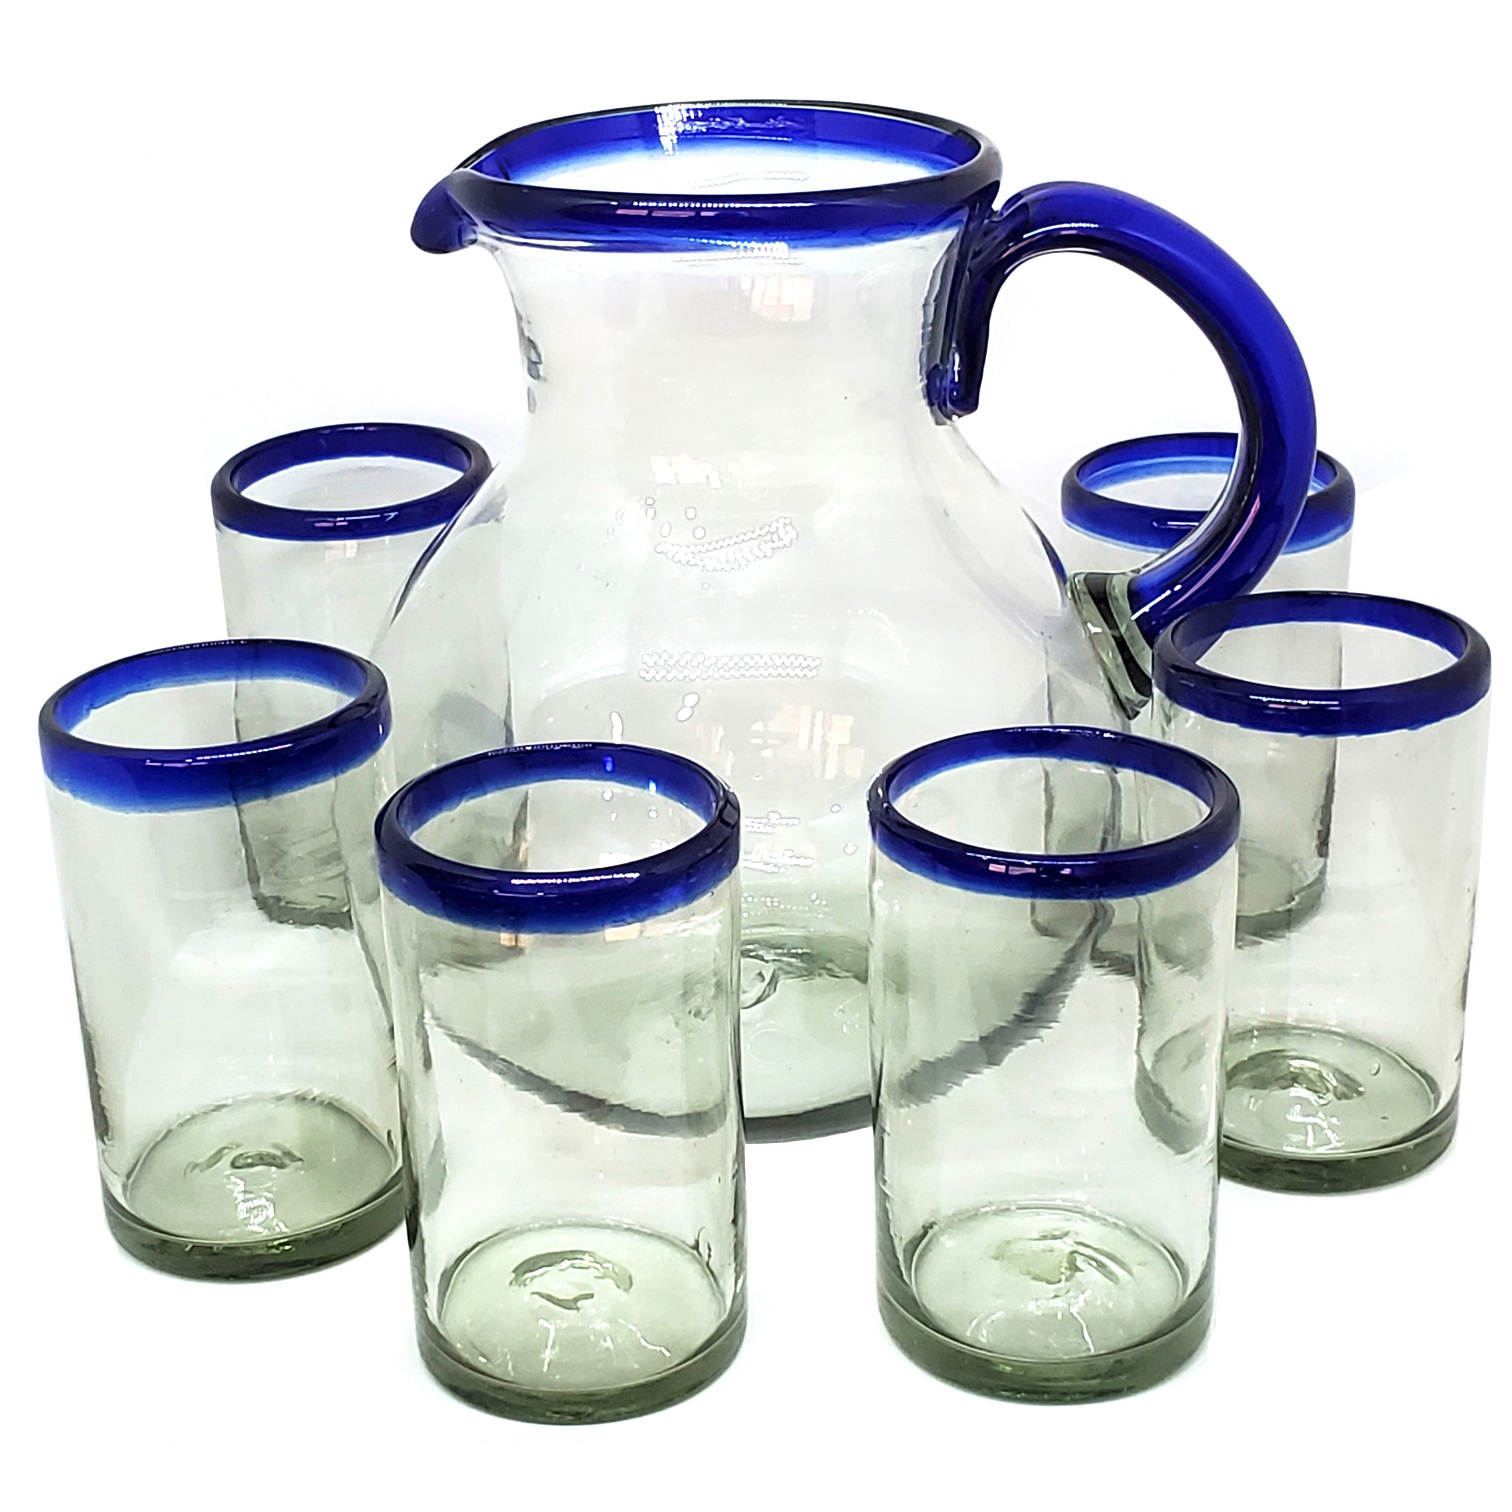 MEXICAN GLASSWARE / Cobalt Blue Rim 120 oz Pitcher and 6 Drinking Glasses set / Bordered in beautiful cobalt blue, this classic pitcher and glasses set will bring a colorful touch to your table.